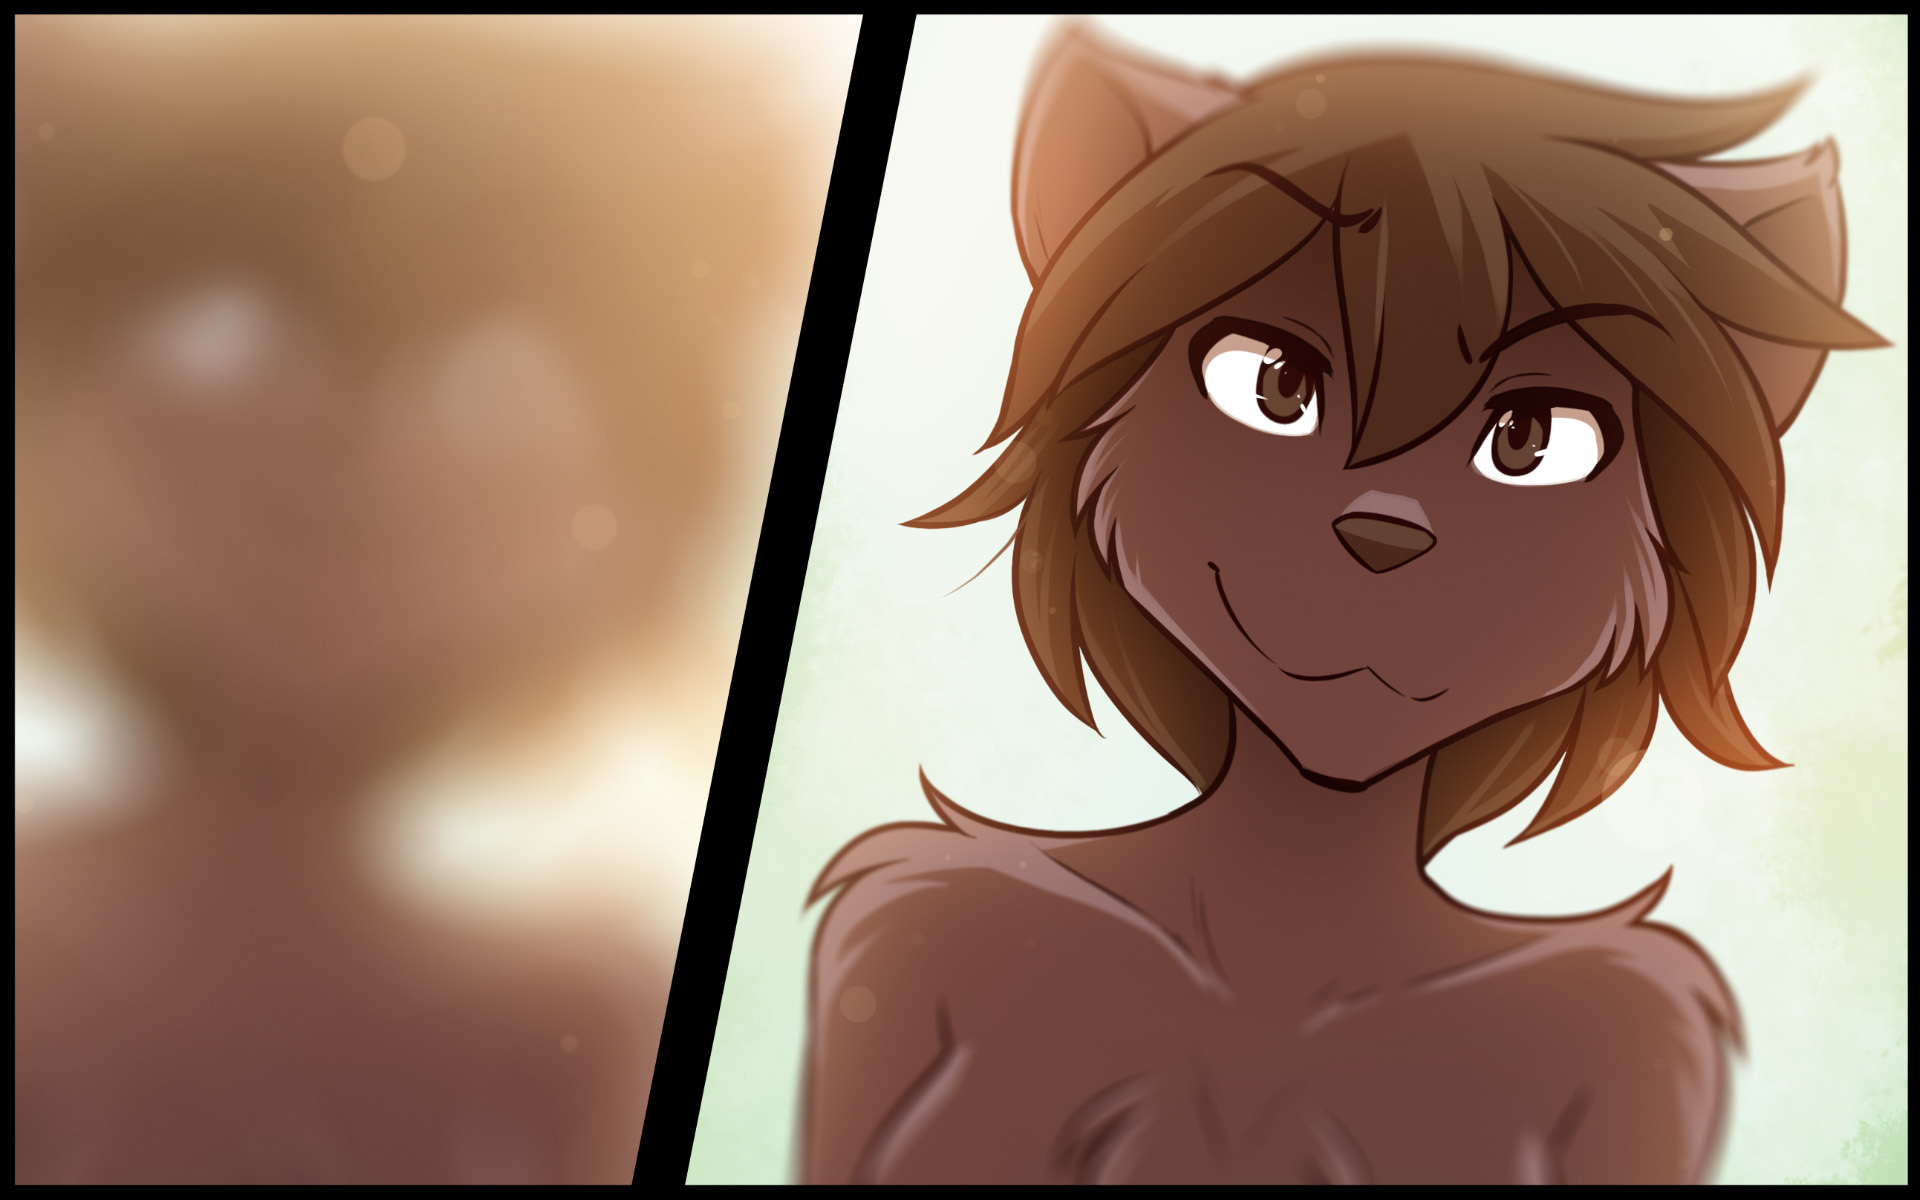 Furry hero. Twokinds Натани. Twokinds Сейри. Комикс twokinds Натани. Twokinds фурри Натани.